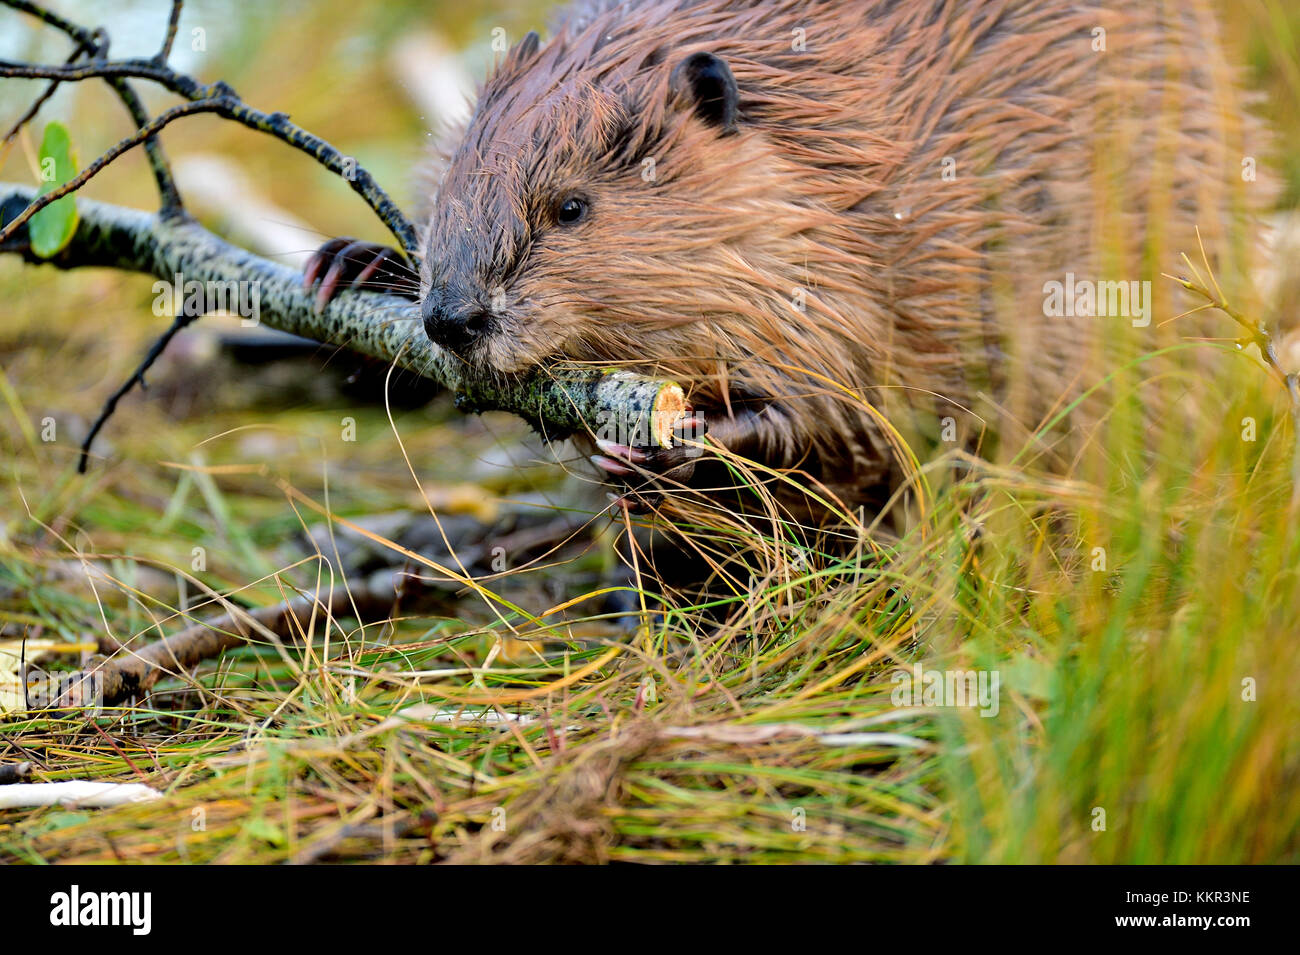 An close up image of an adult beaver  'Castor canadenis'; feeding on some branches that he is holding between ths paws. Stock Photo